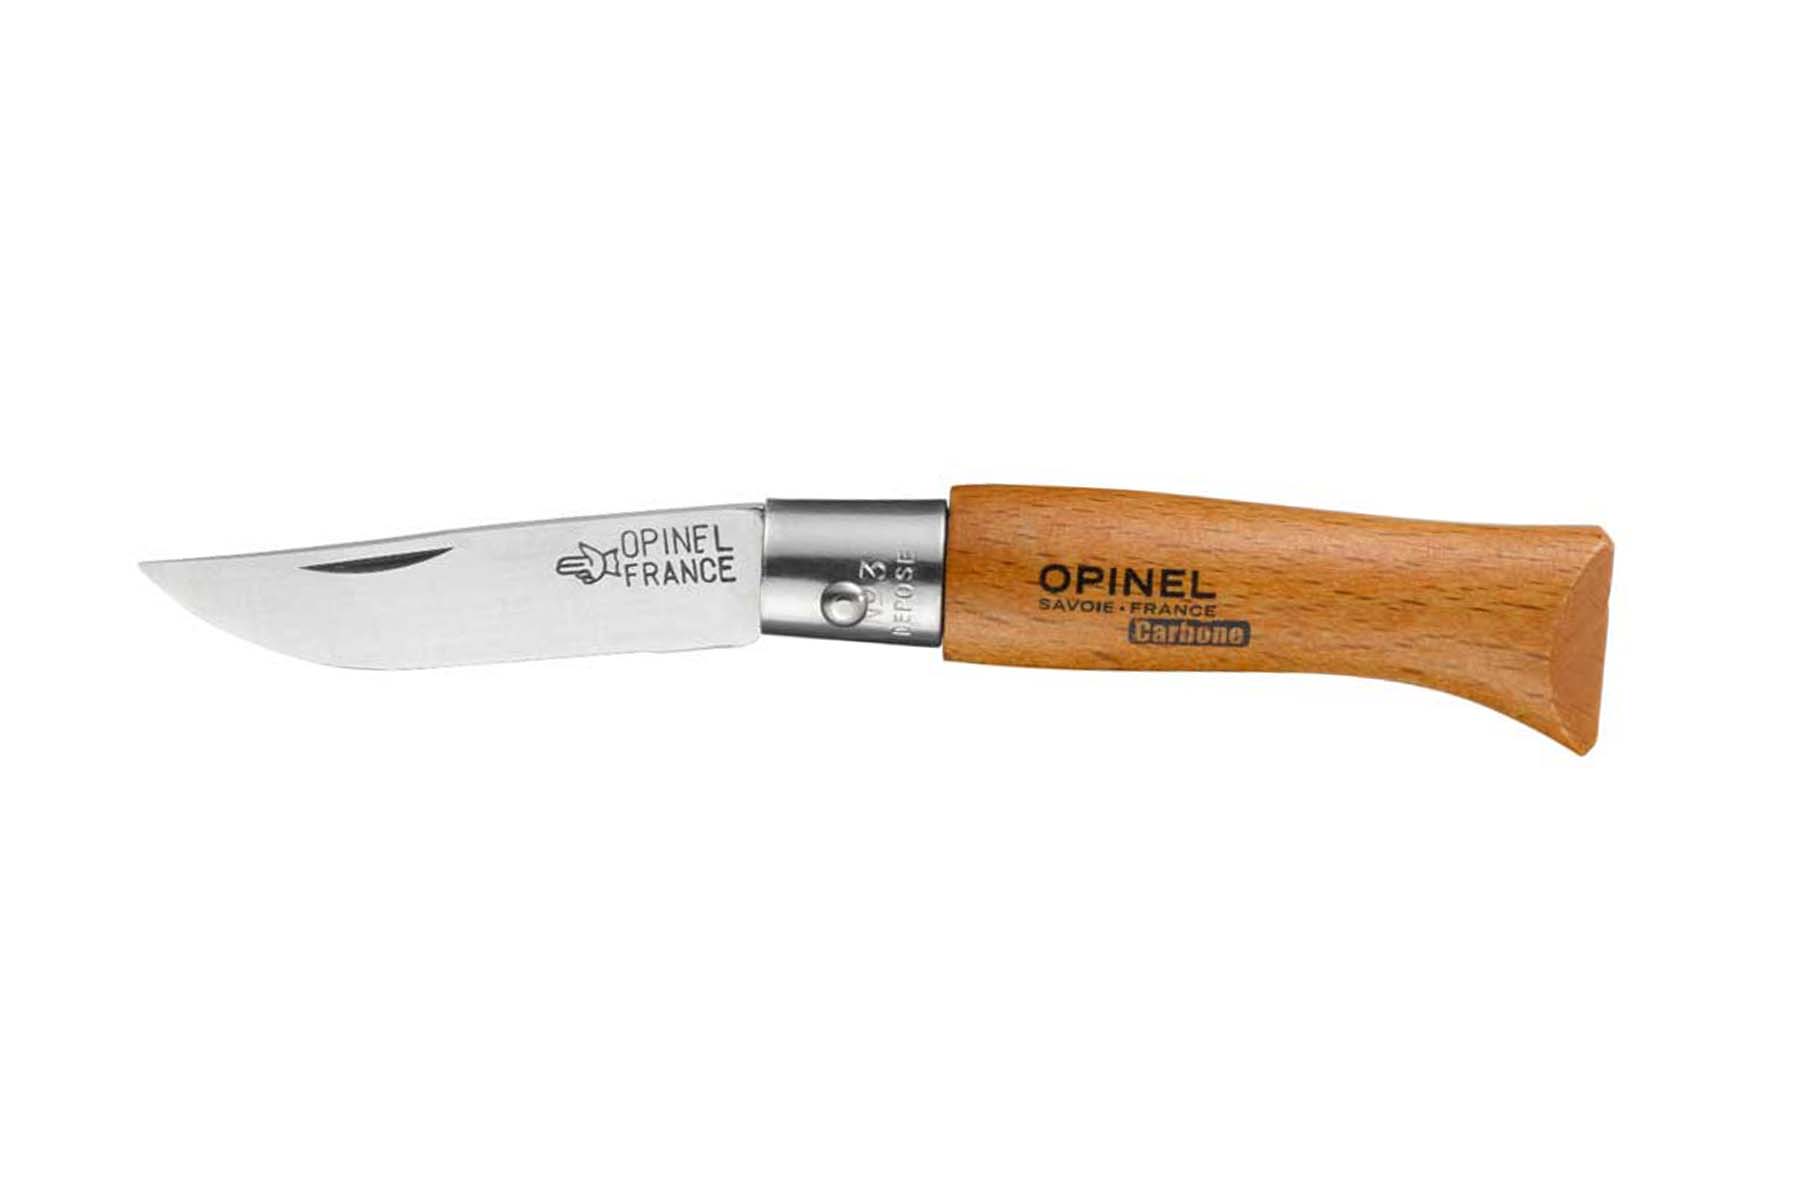 Couteau Opinel n°03 lame carbone